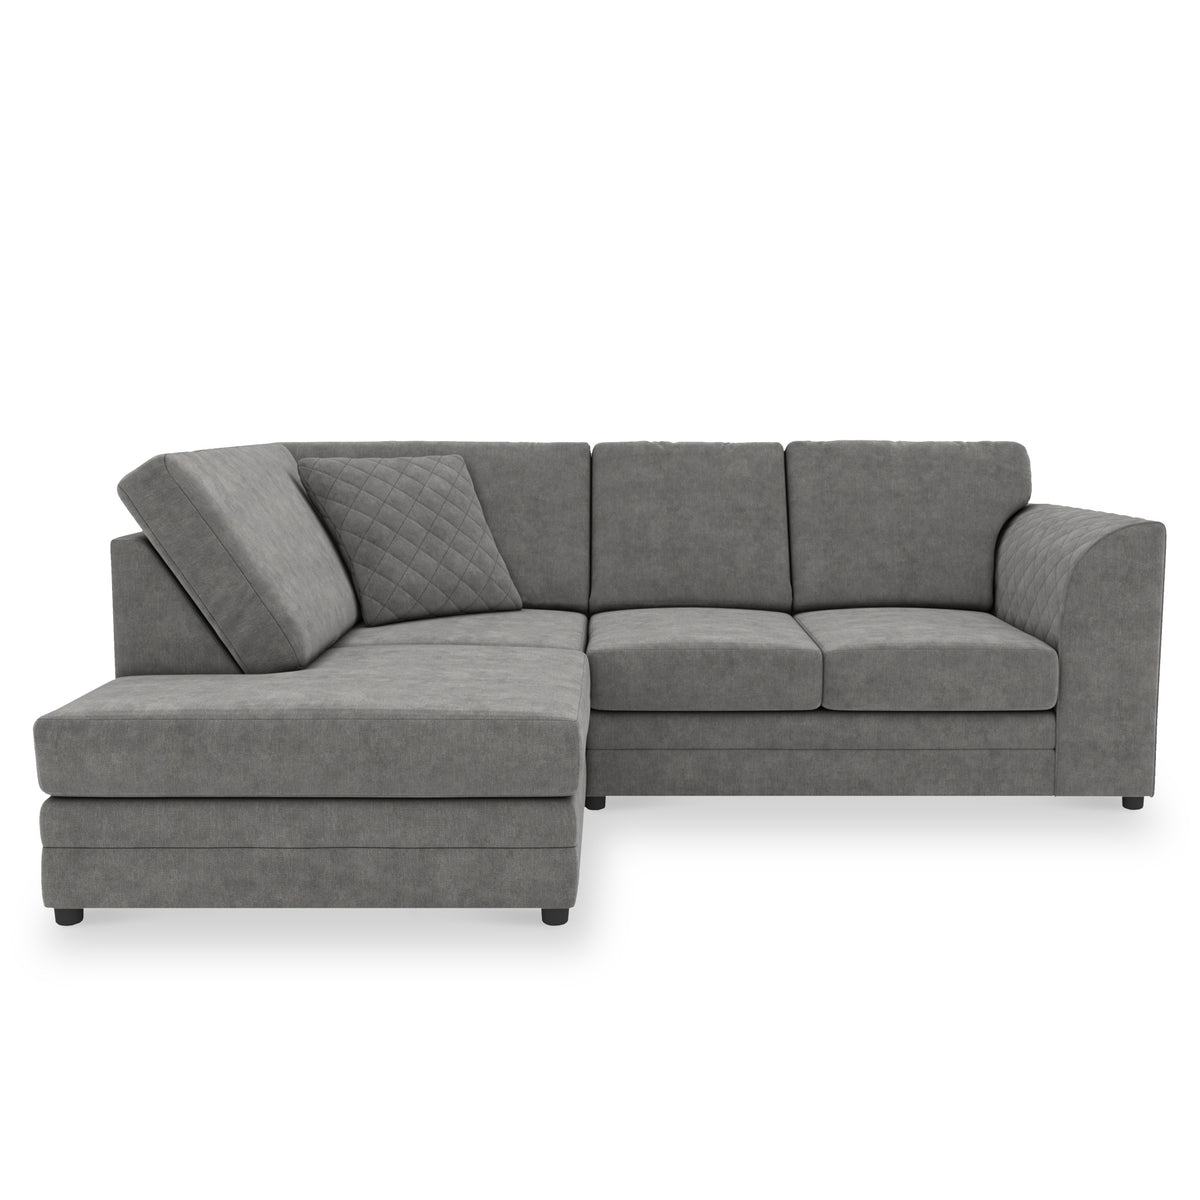 Seymour Charcoal Left Hand Corner couch